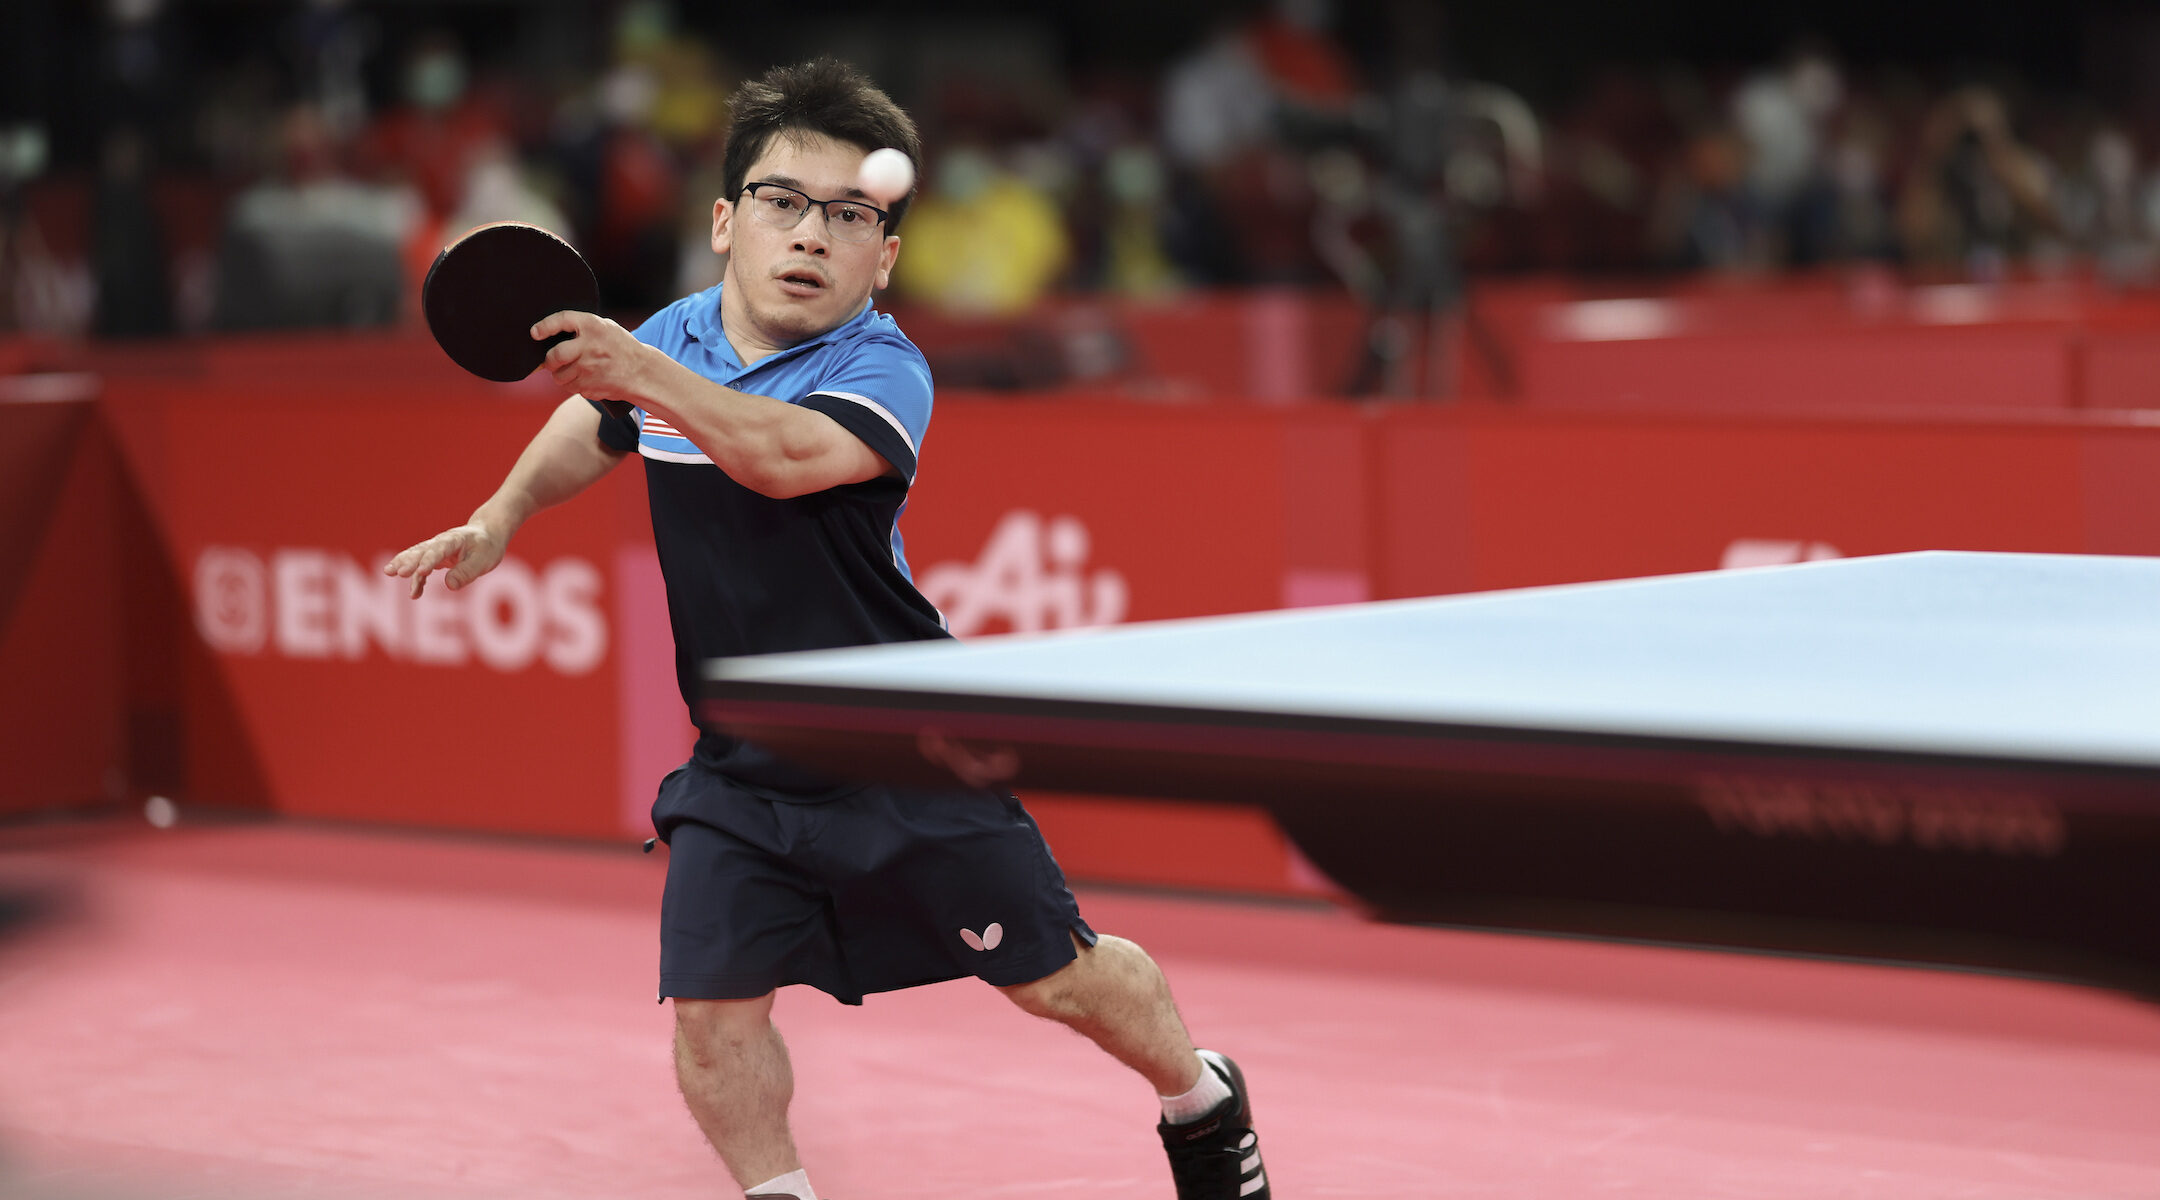 In upset for US, 20-year-old Jewish athlete wins Paralympic table tennis gold The Times of Israel